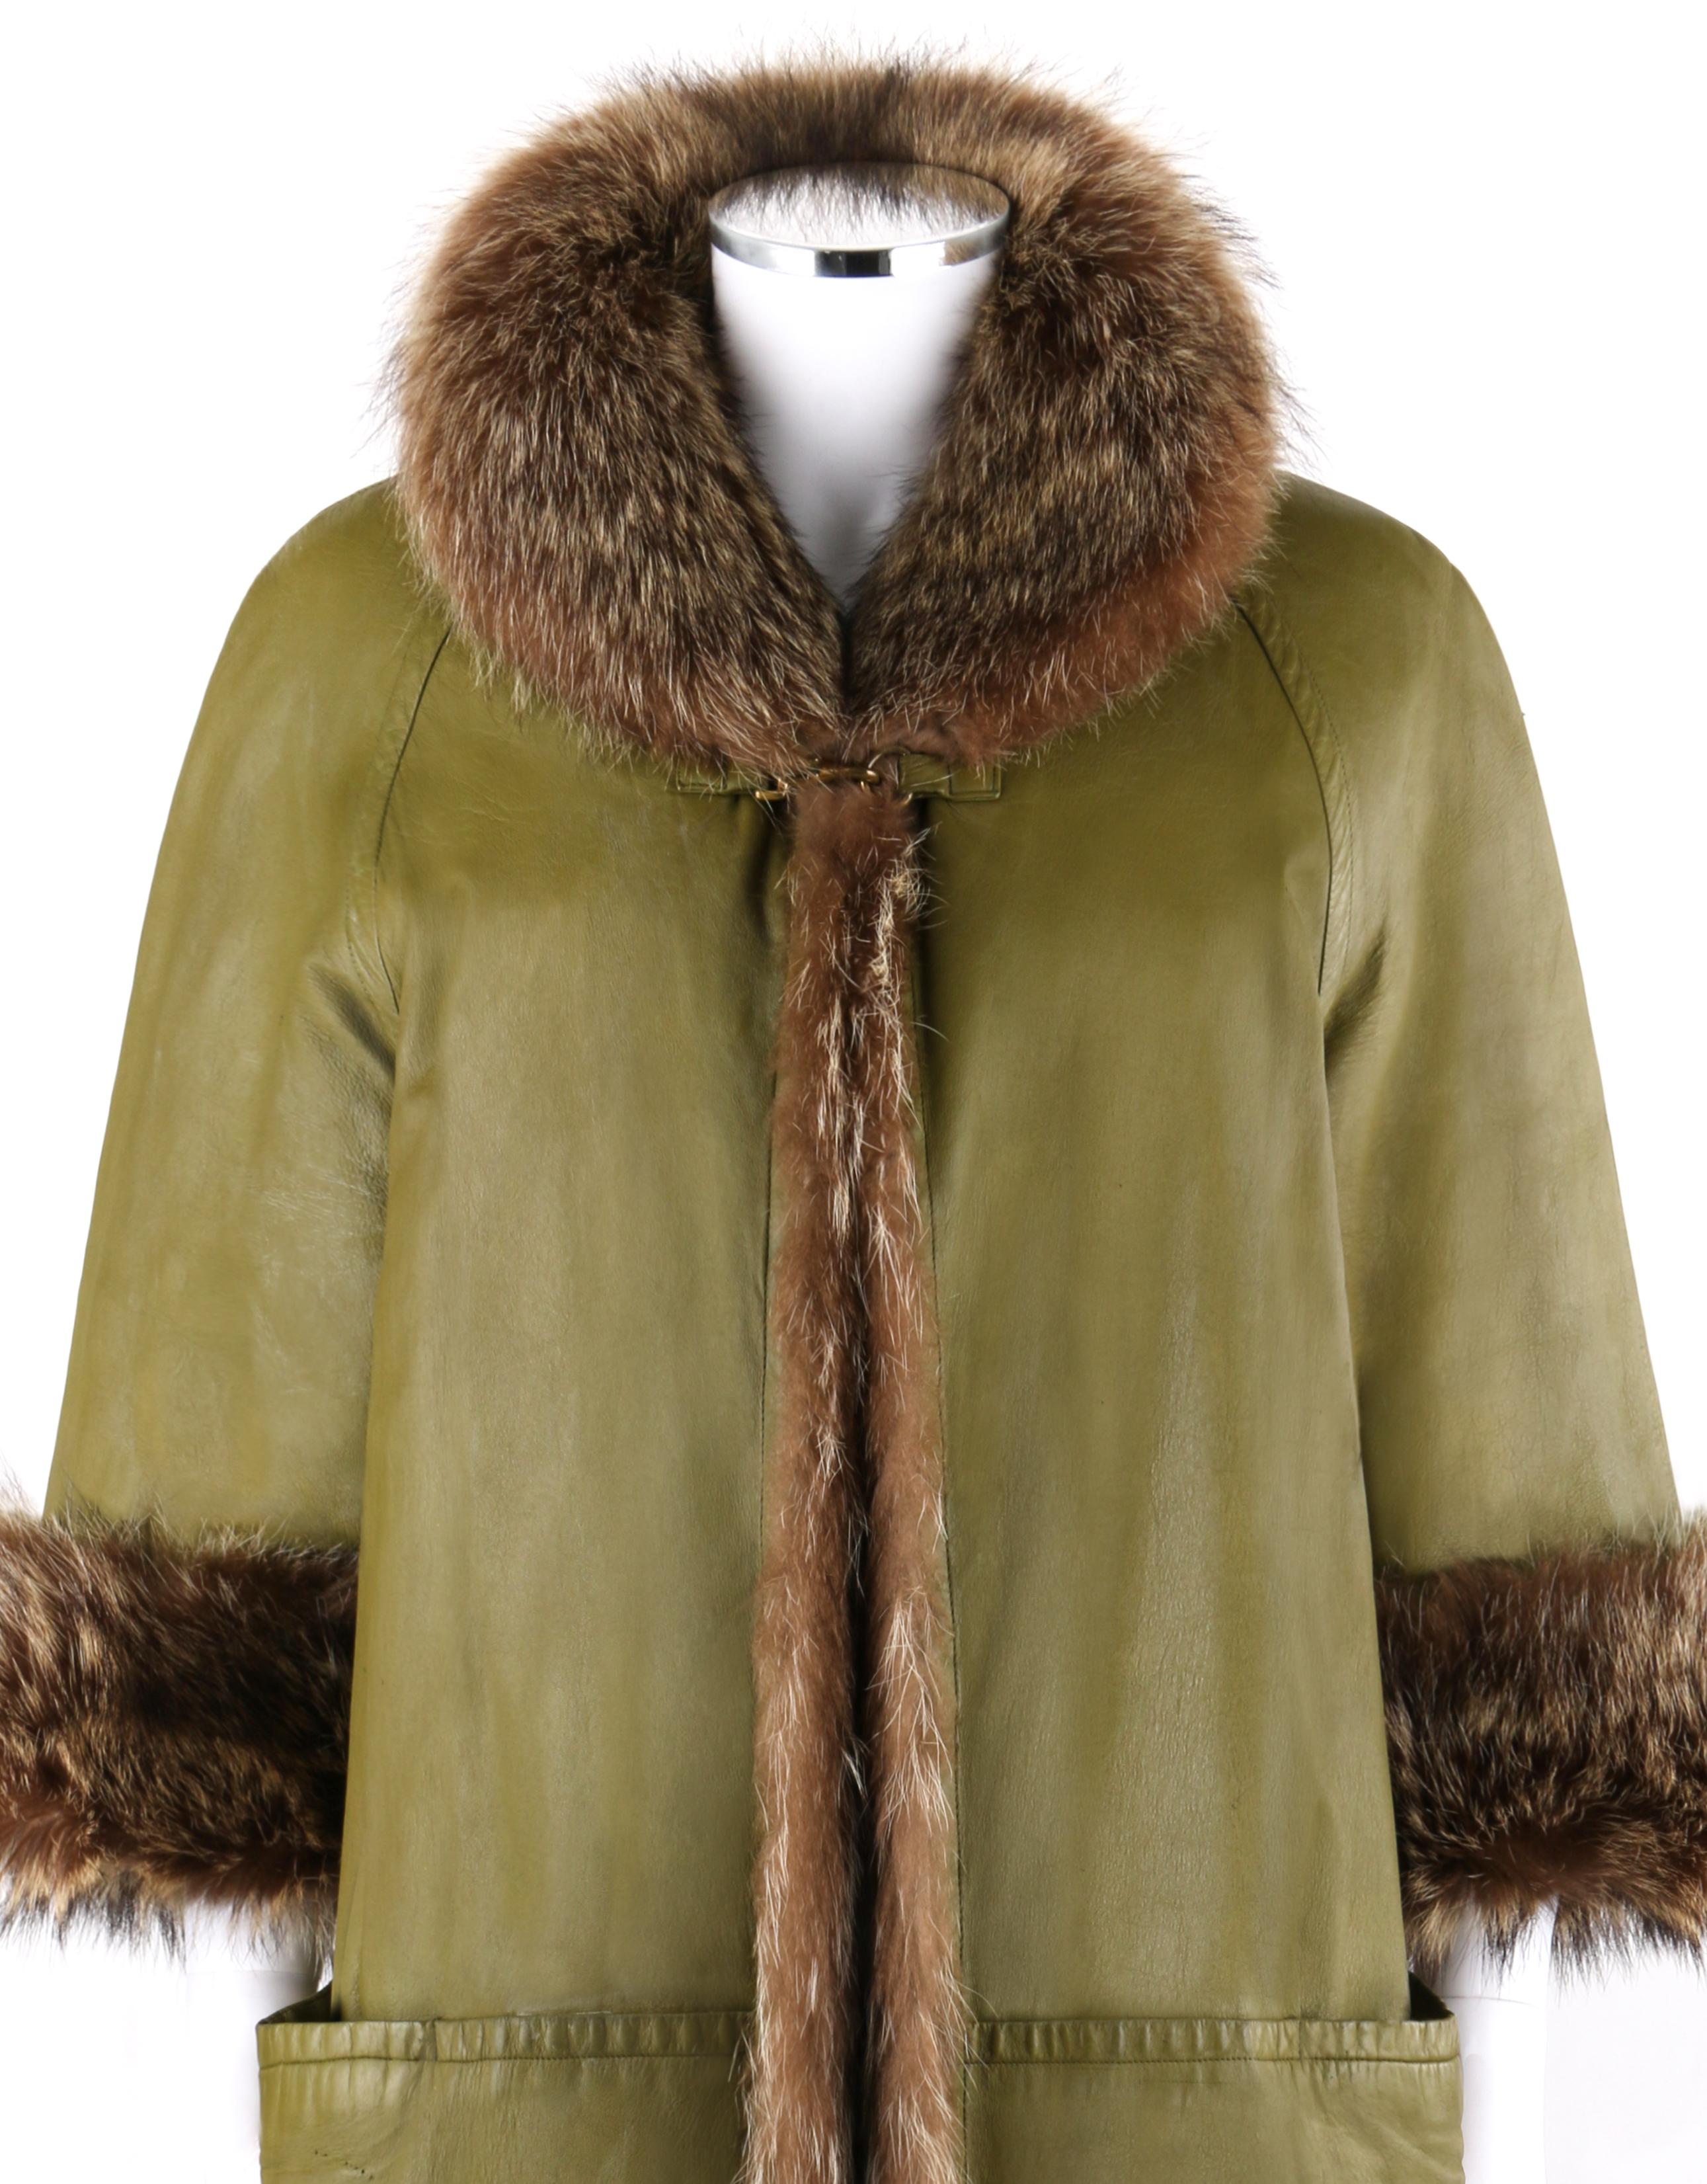 BONNIE CASHIN c.1960’s SILLS & Co. Olive Green Raccoon Fur Leather Mod Overcoat 
 
Circa: 1960’s
Designer: Bonnie Cashin 
Label(s): Bonnie Cashin Design / Sills and Co. 
Style: Coat
Color(s): Shades of green and brown
Lined: Yes 
Unmarked Fabric